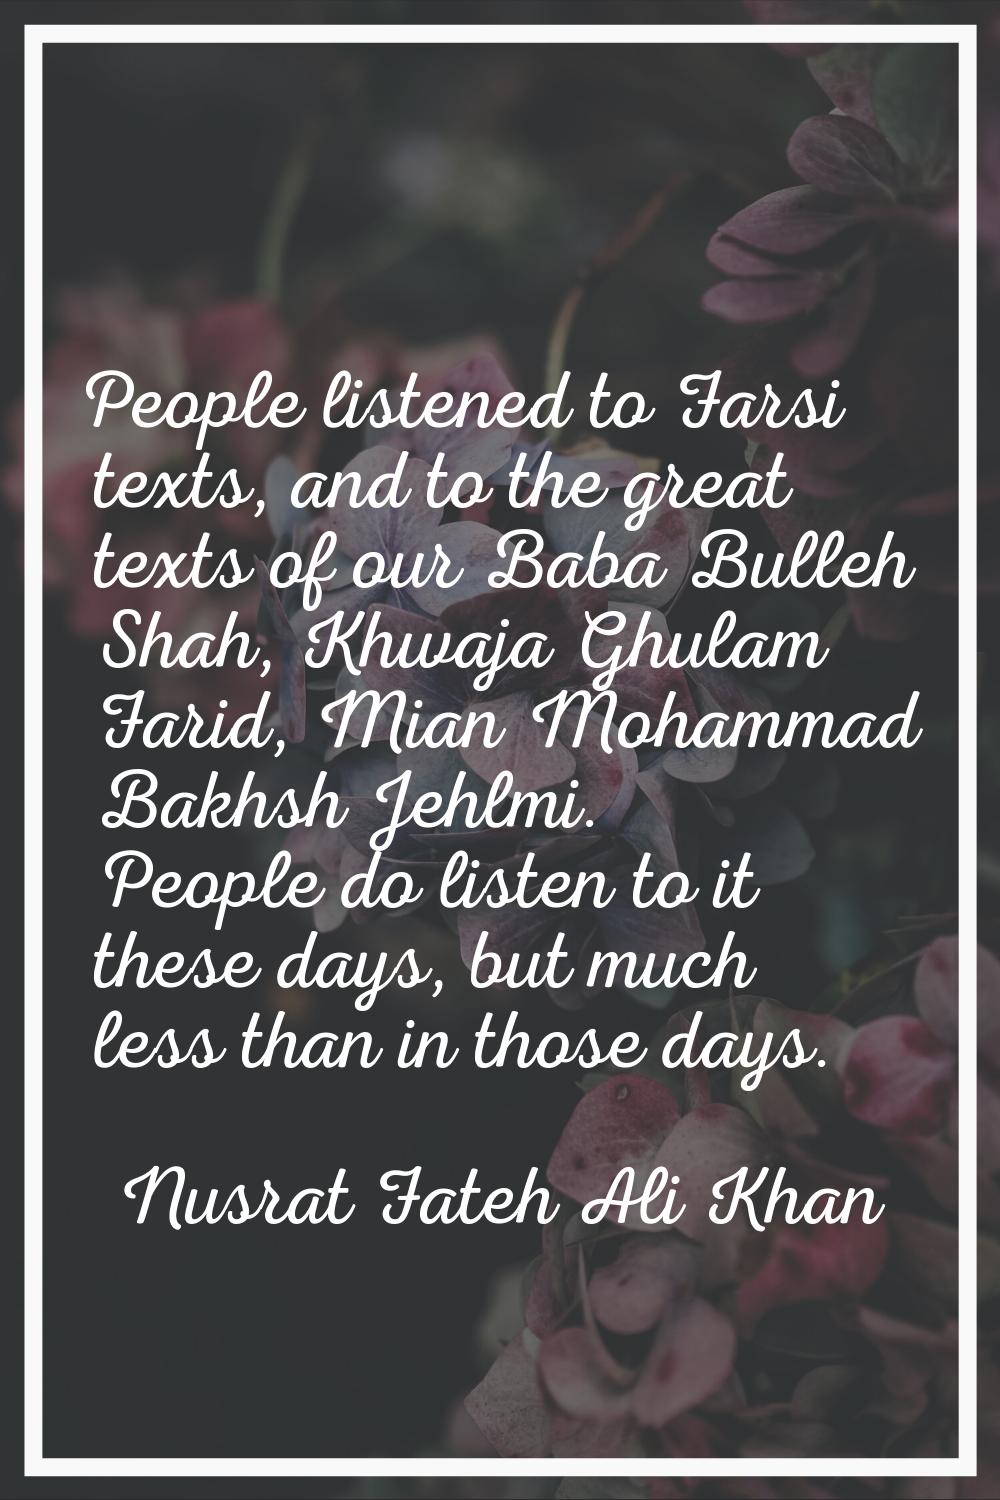 People listened to Farsi texts, and to the great texts of our Baba Bulleh Shah, Khwaja Ghulam Farid